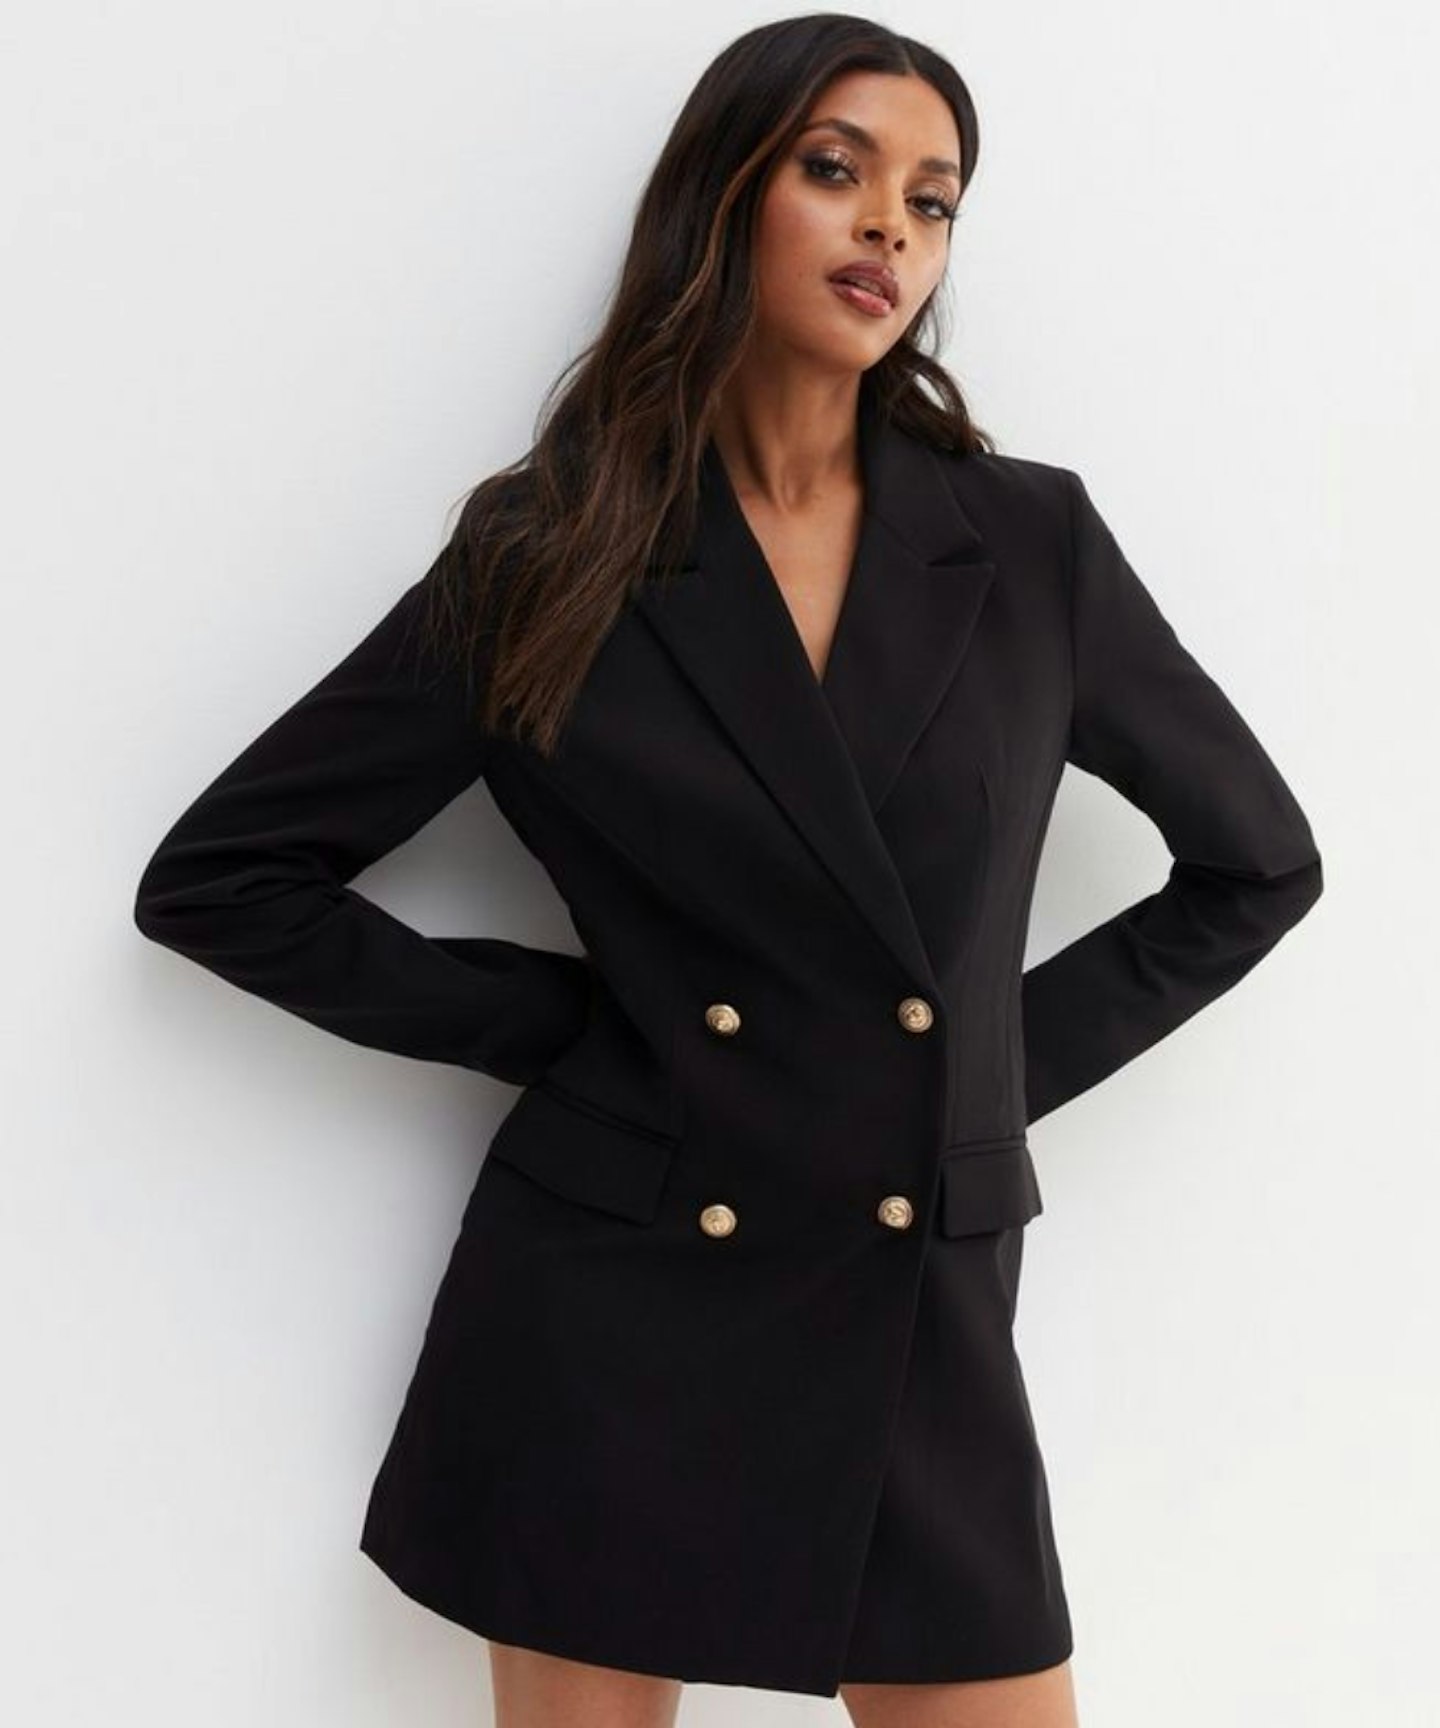 The Best Blazer Dresses To Nail Day-To-Night Outfits